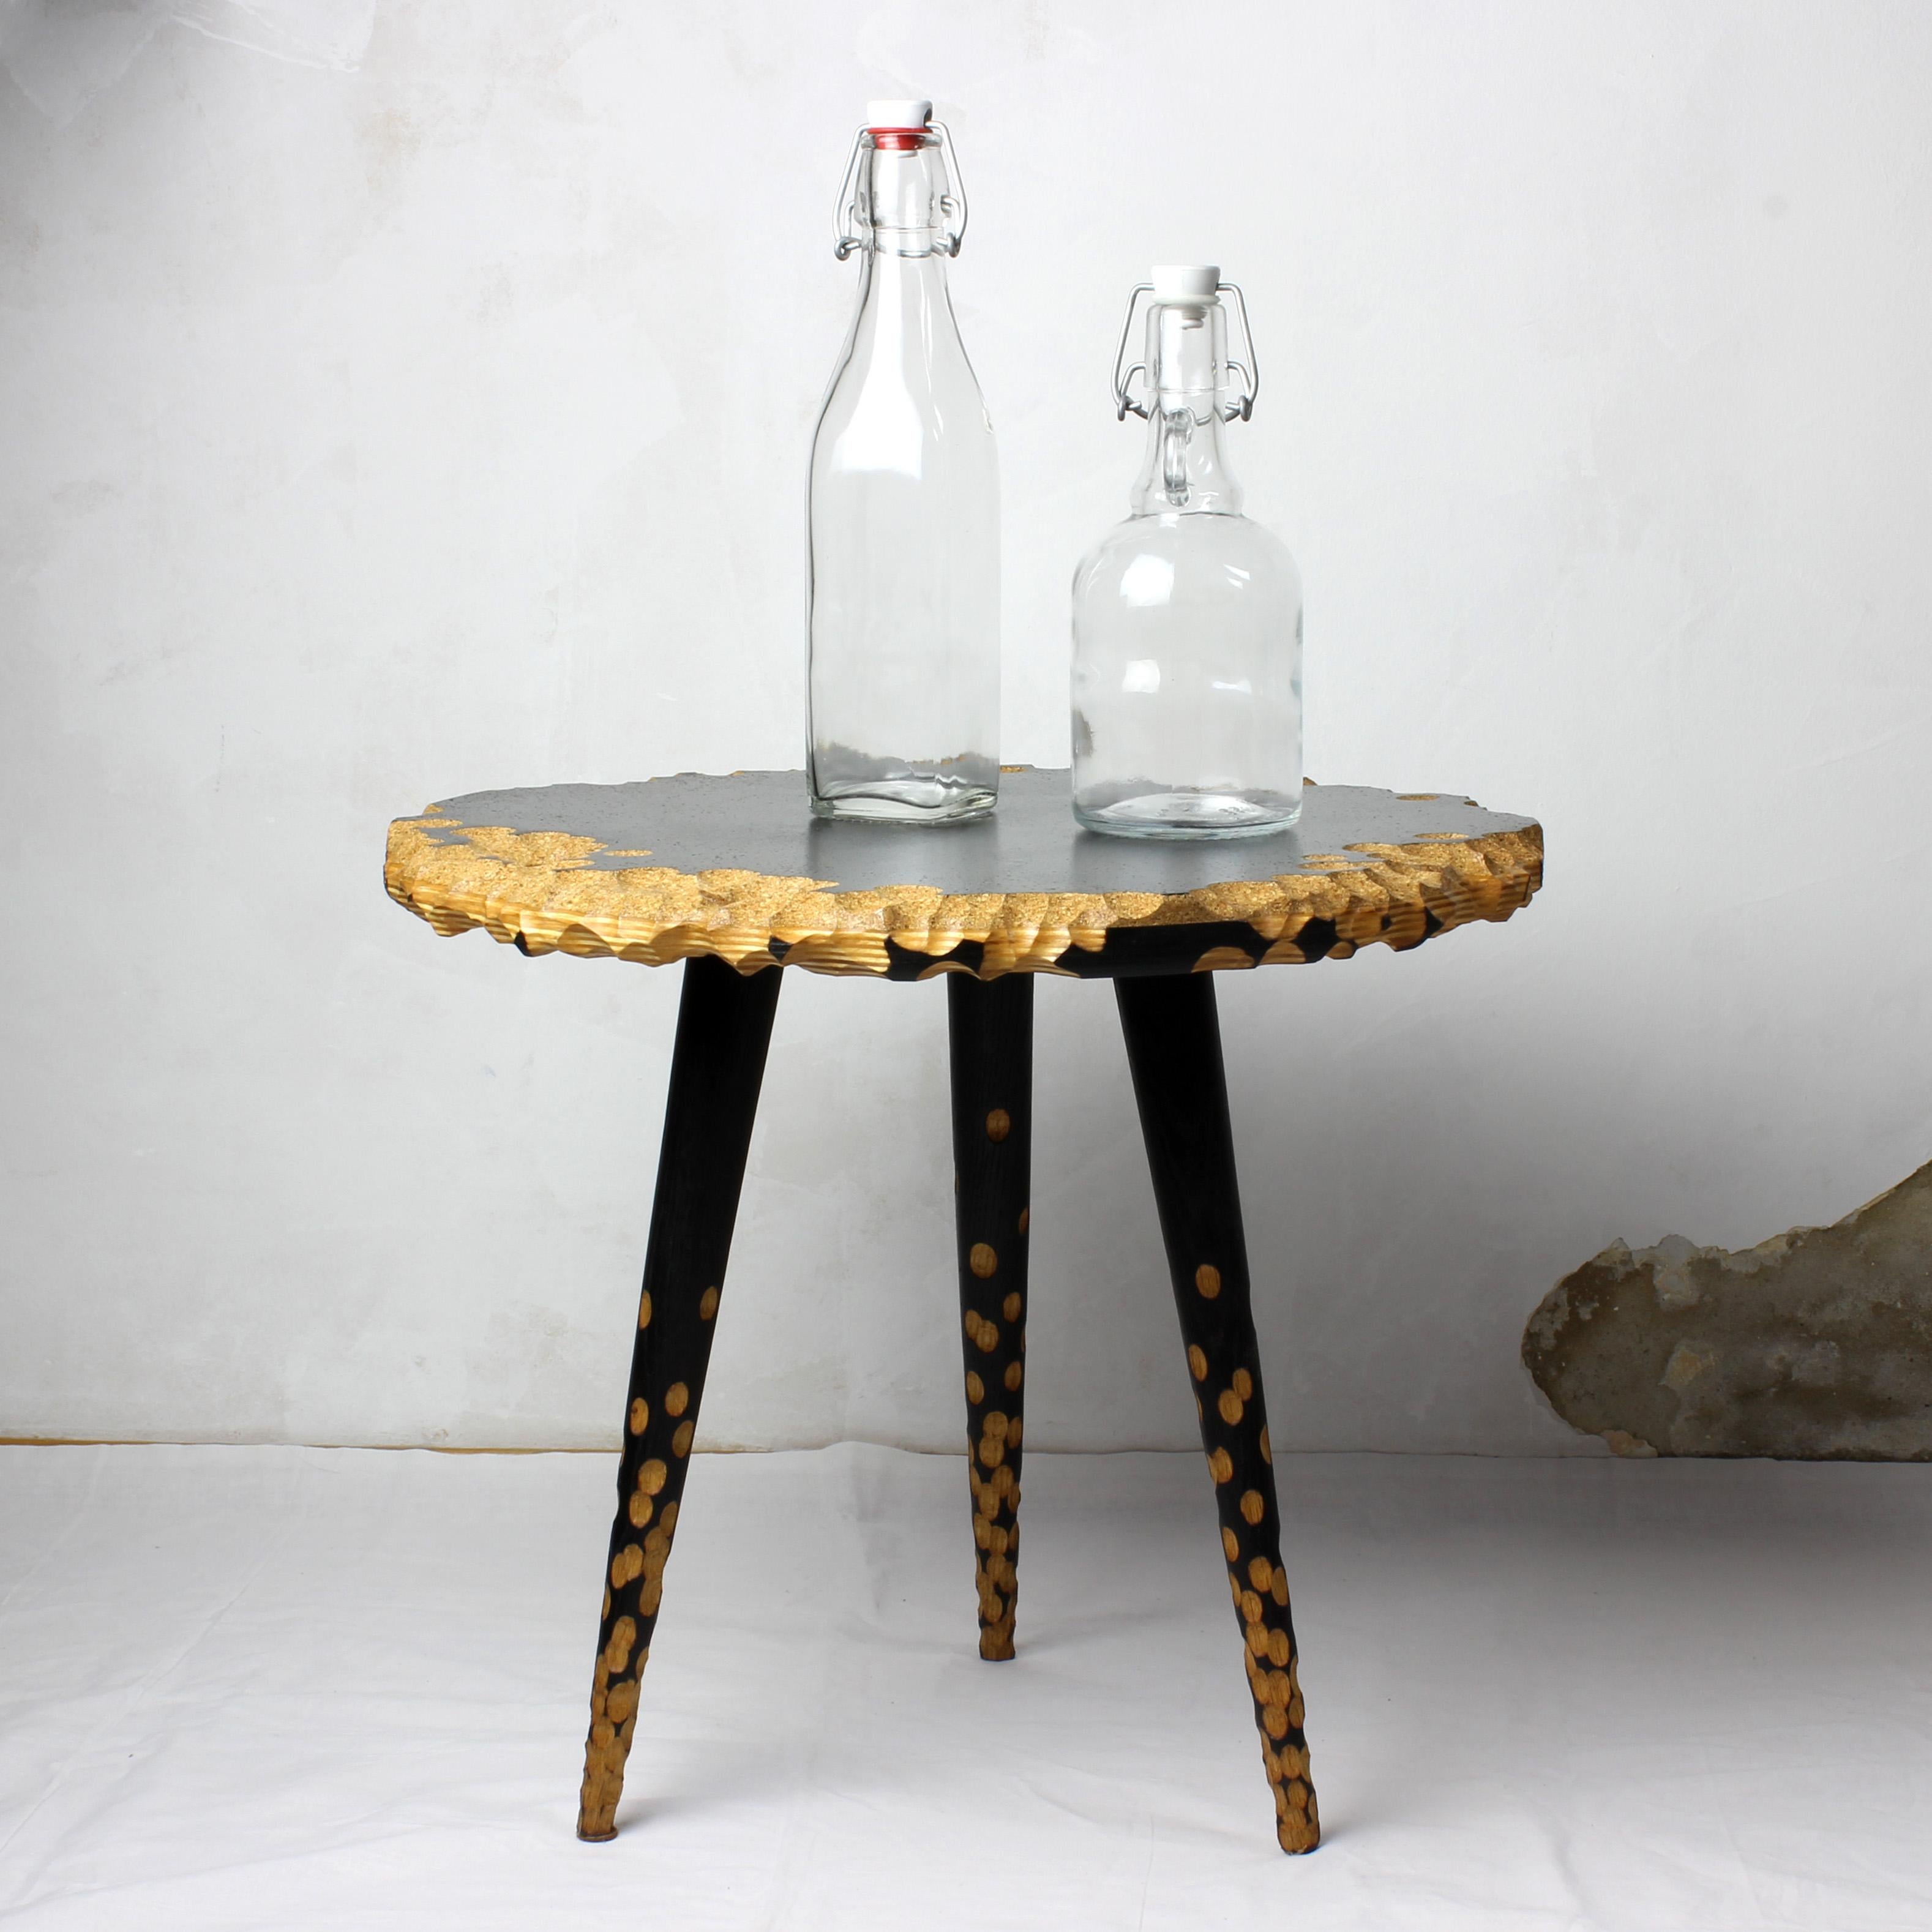 Collectible art sculpture side table, one of a kind stool, is made from repurposed wood furniture (mid-century style stool) and cork. Creating new objects from reclaimed materials are the real challenge and joy. This organic shaped sculptural stool